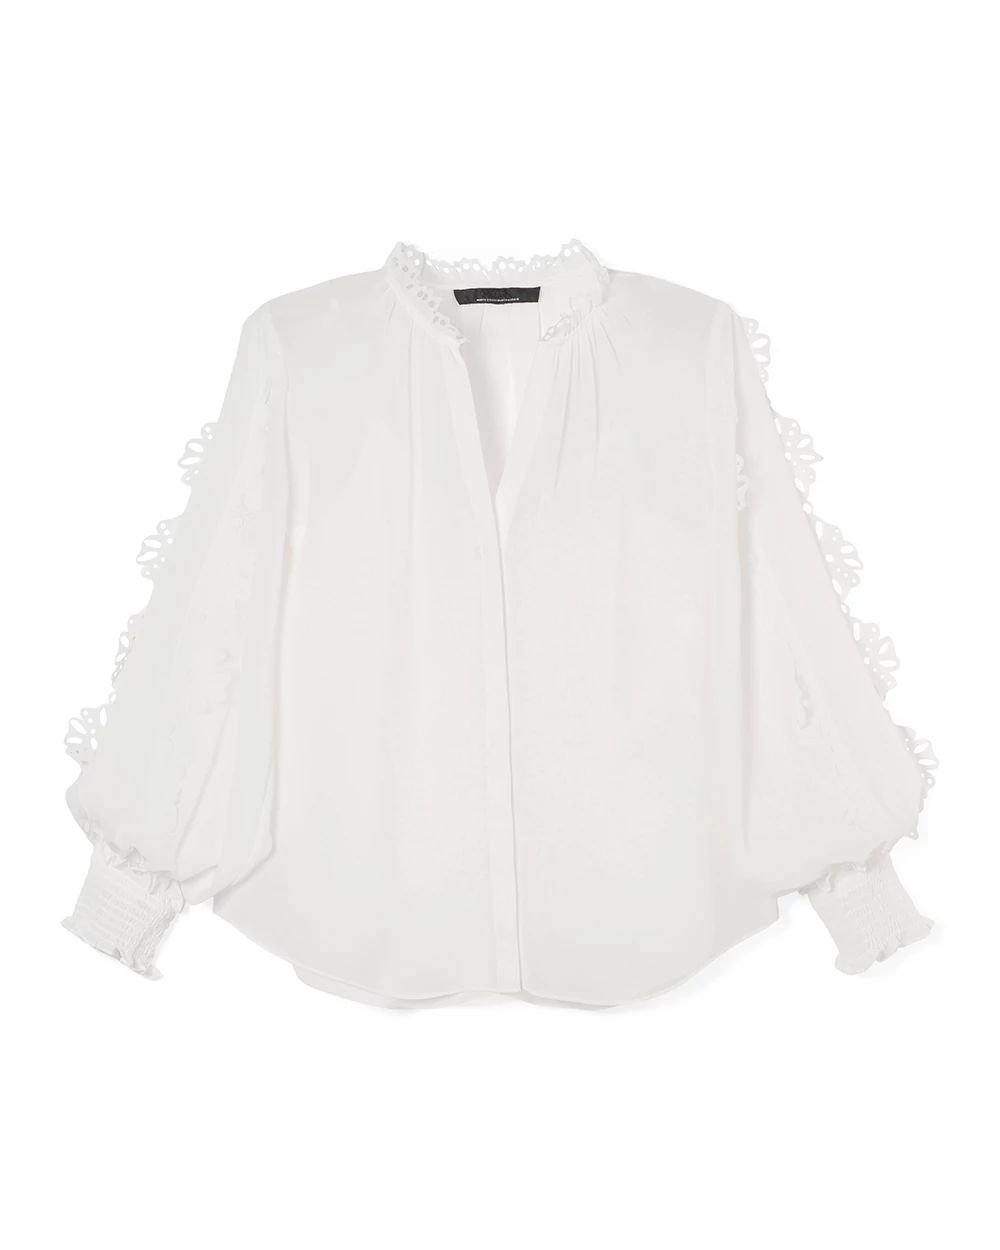 Laser Cut Ruffle Sleeve Blouse click to view larger image.